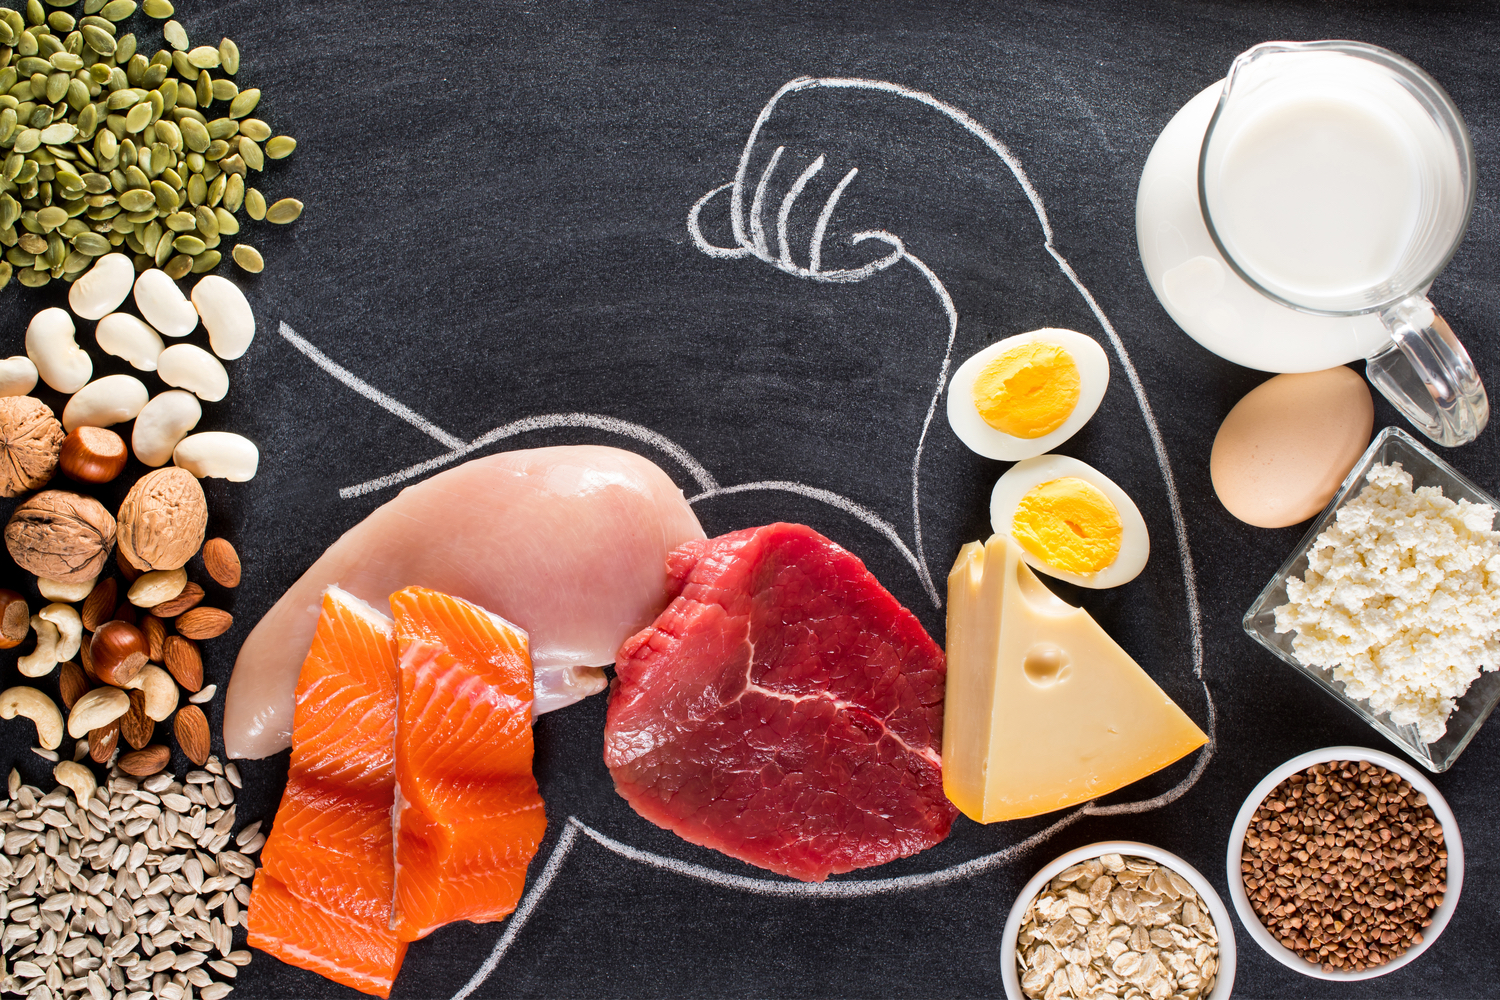 High-Protein Meals: Benefits and Food Options